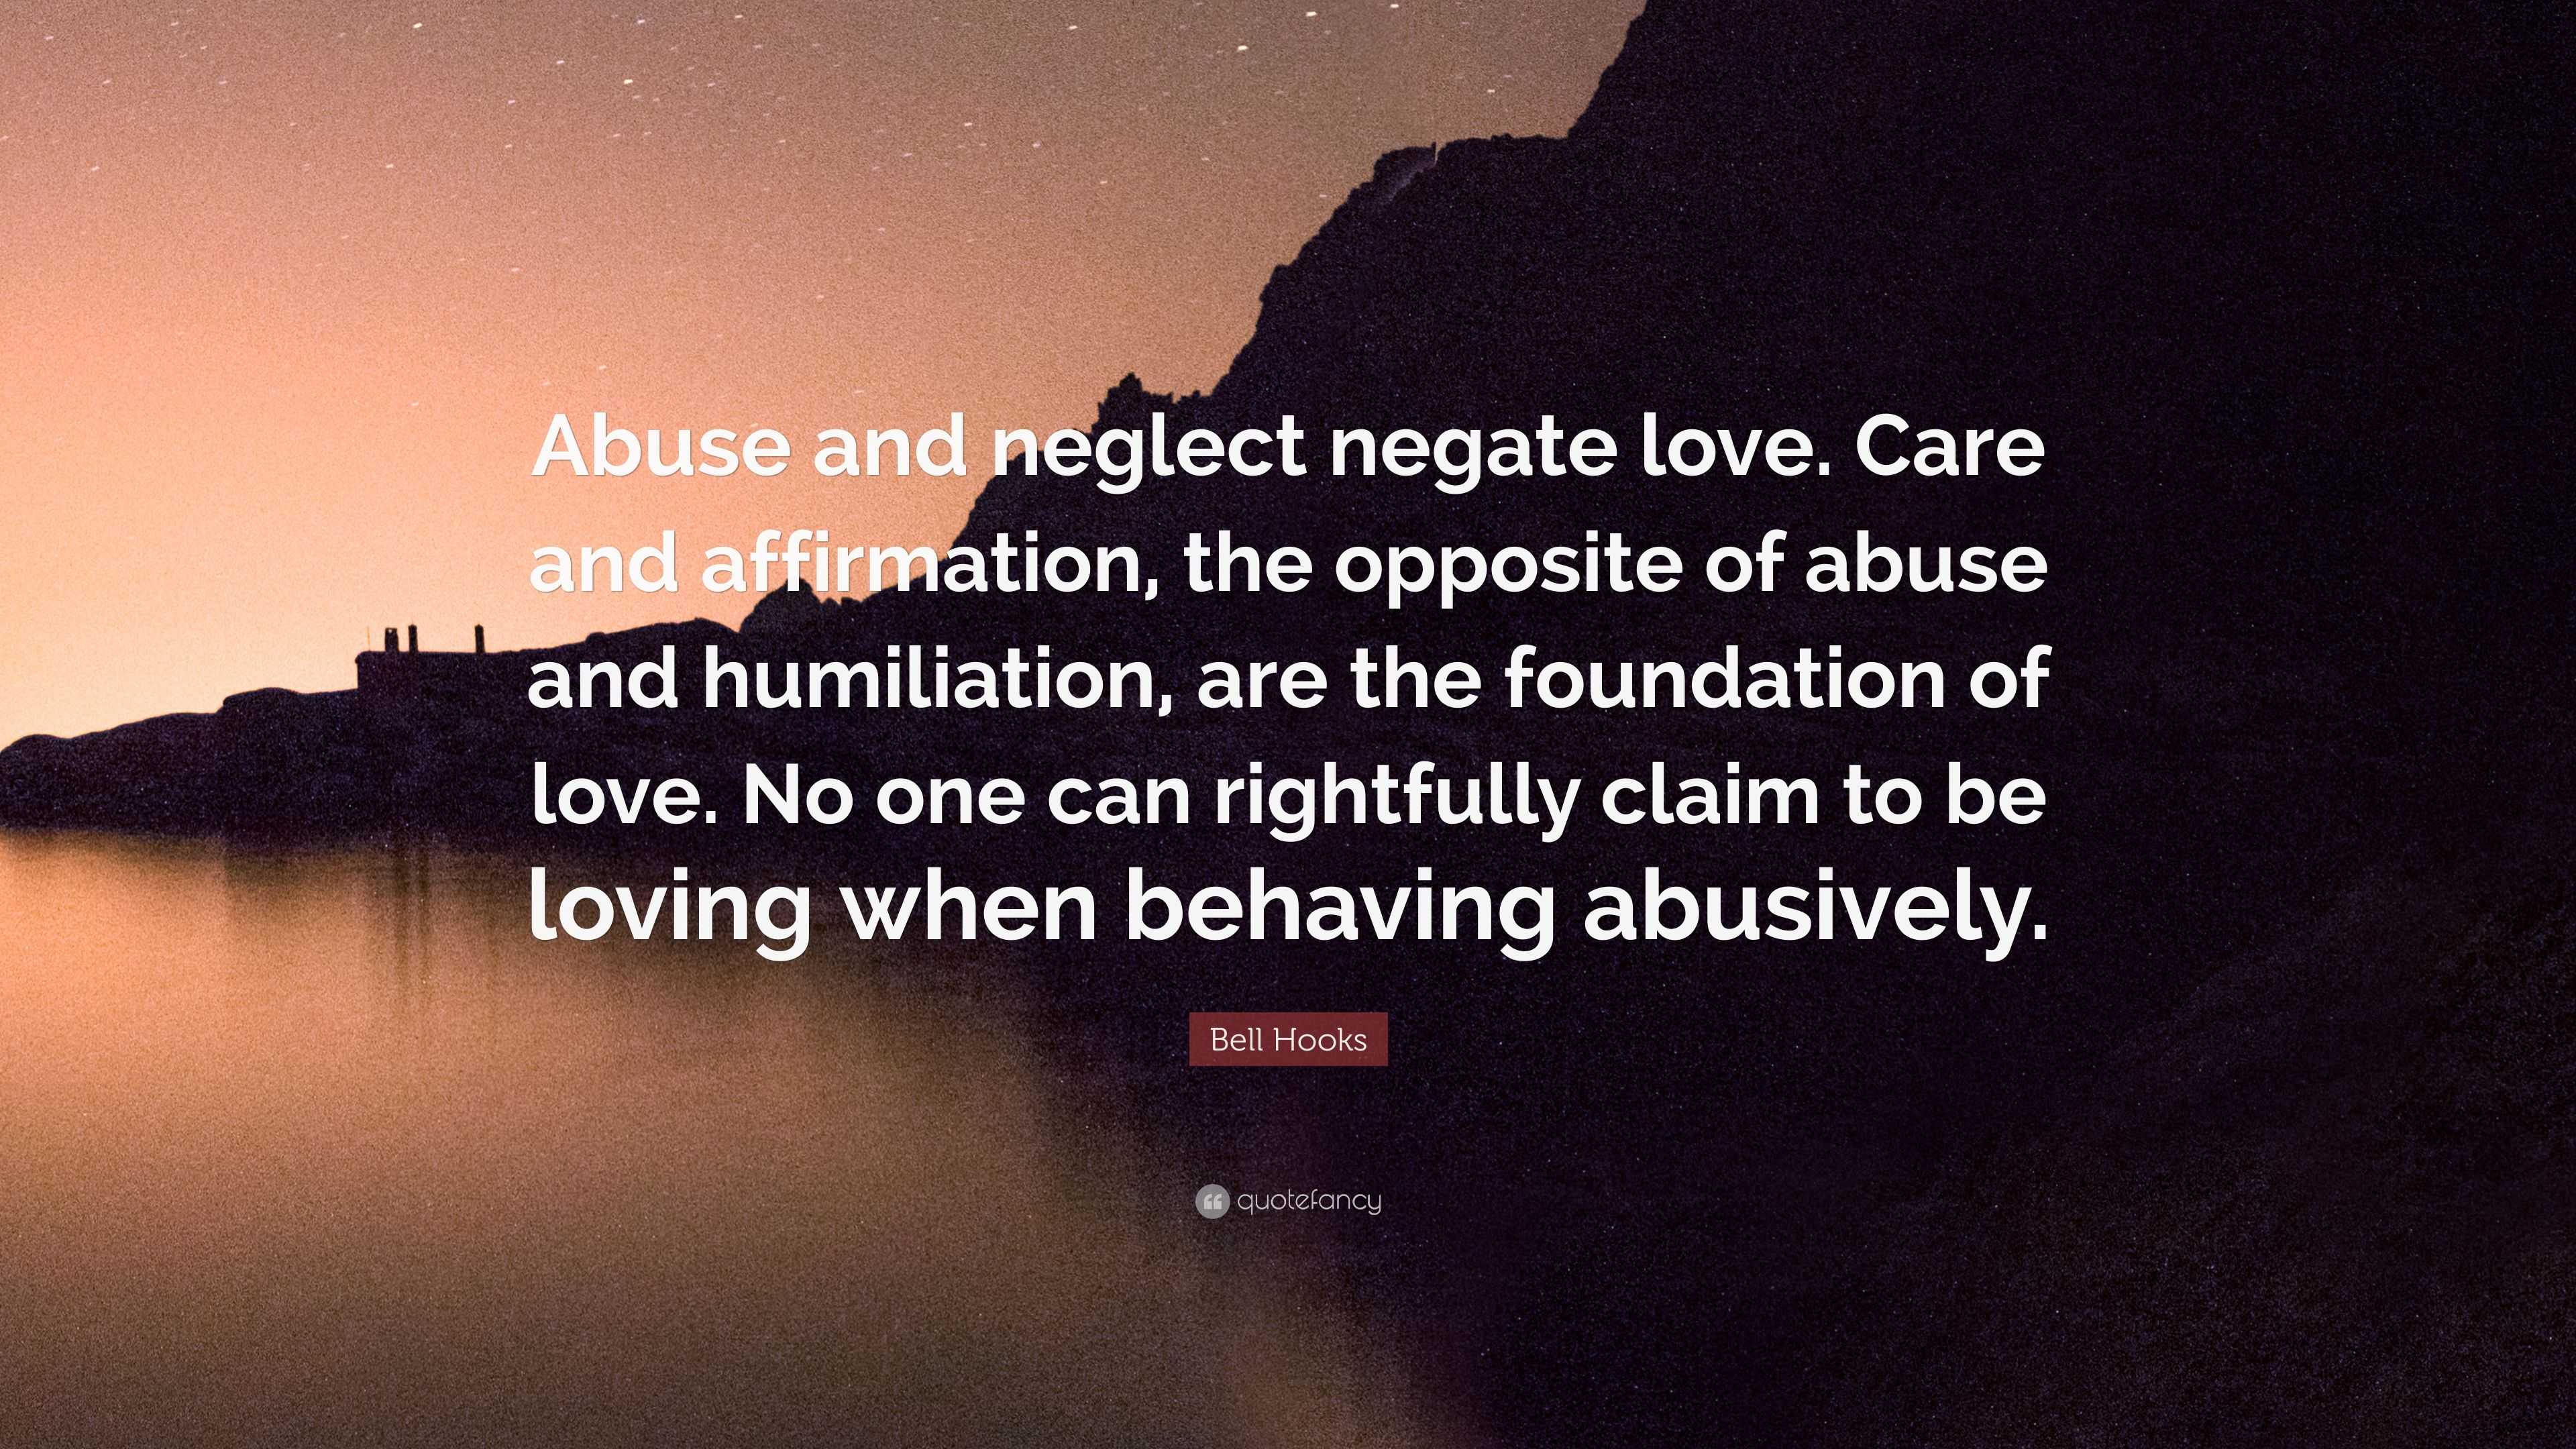 Bell Hooks Quote “Abuse and neglect negate love Care and affirmation the